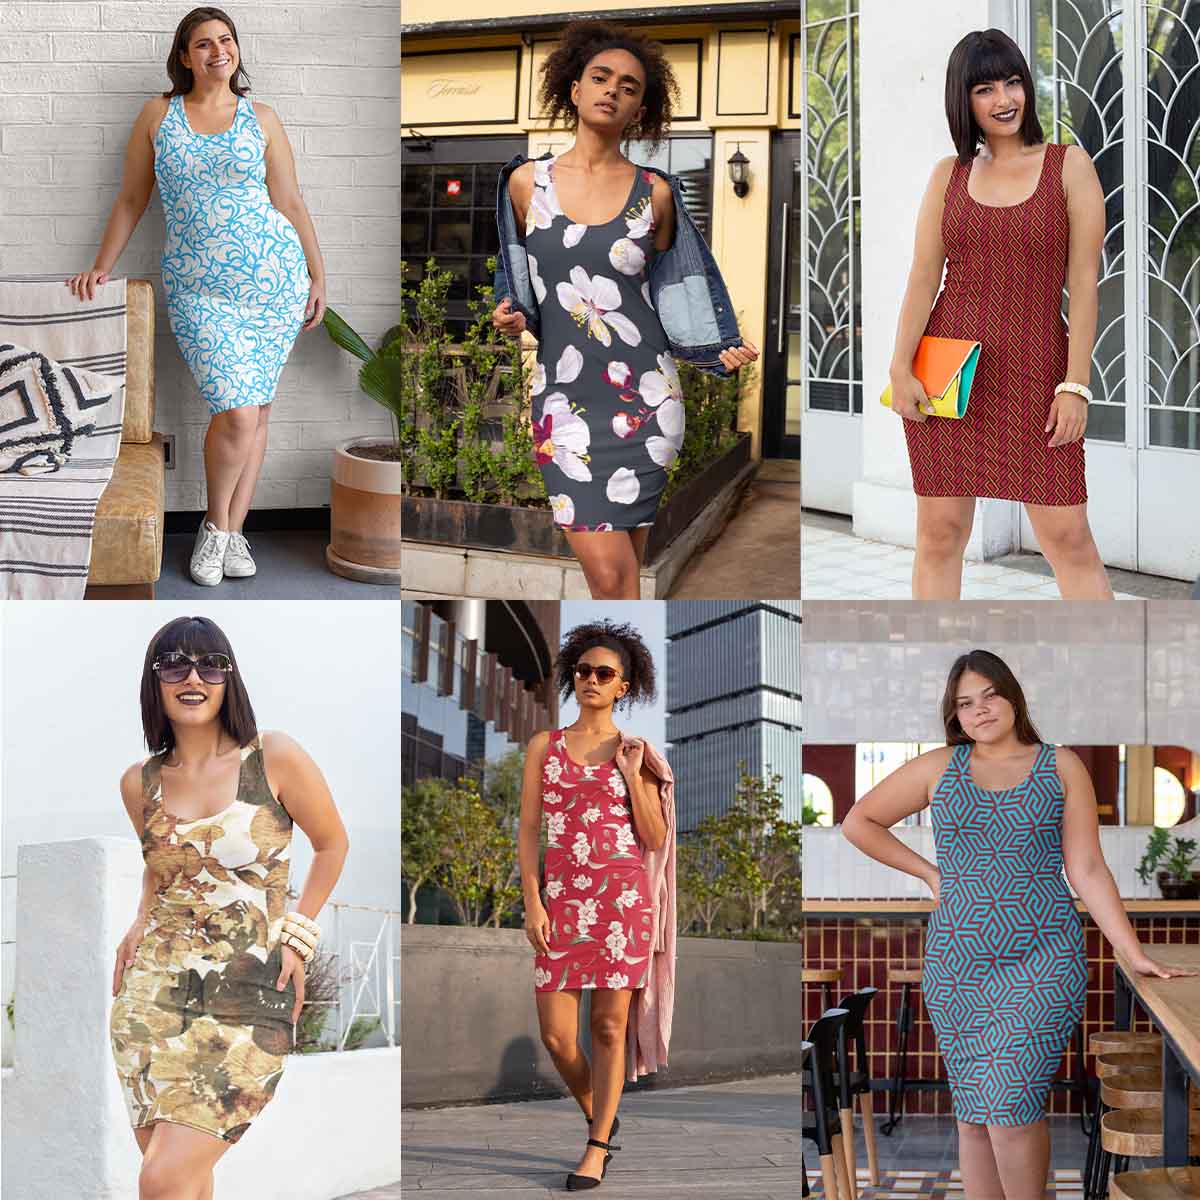 Image of six women wearing Casual Fitted Bodycon Dresses from the new Parnova.Store range.